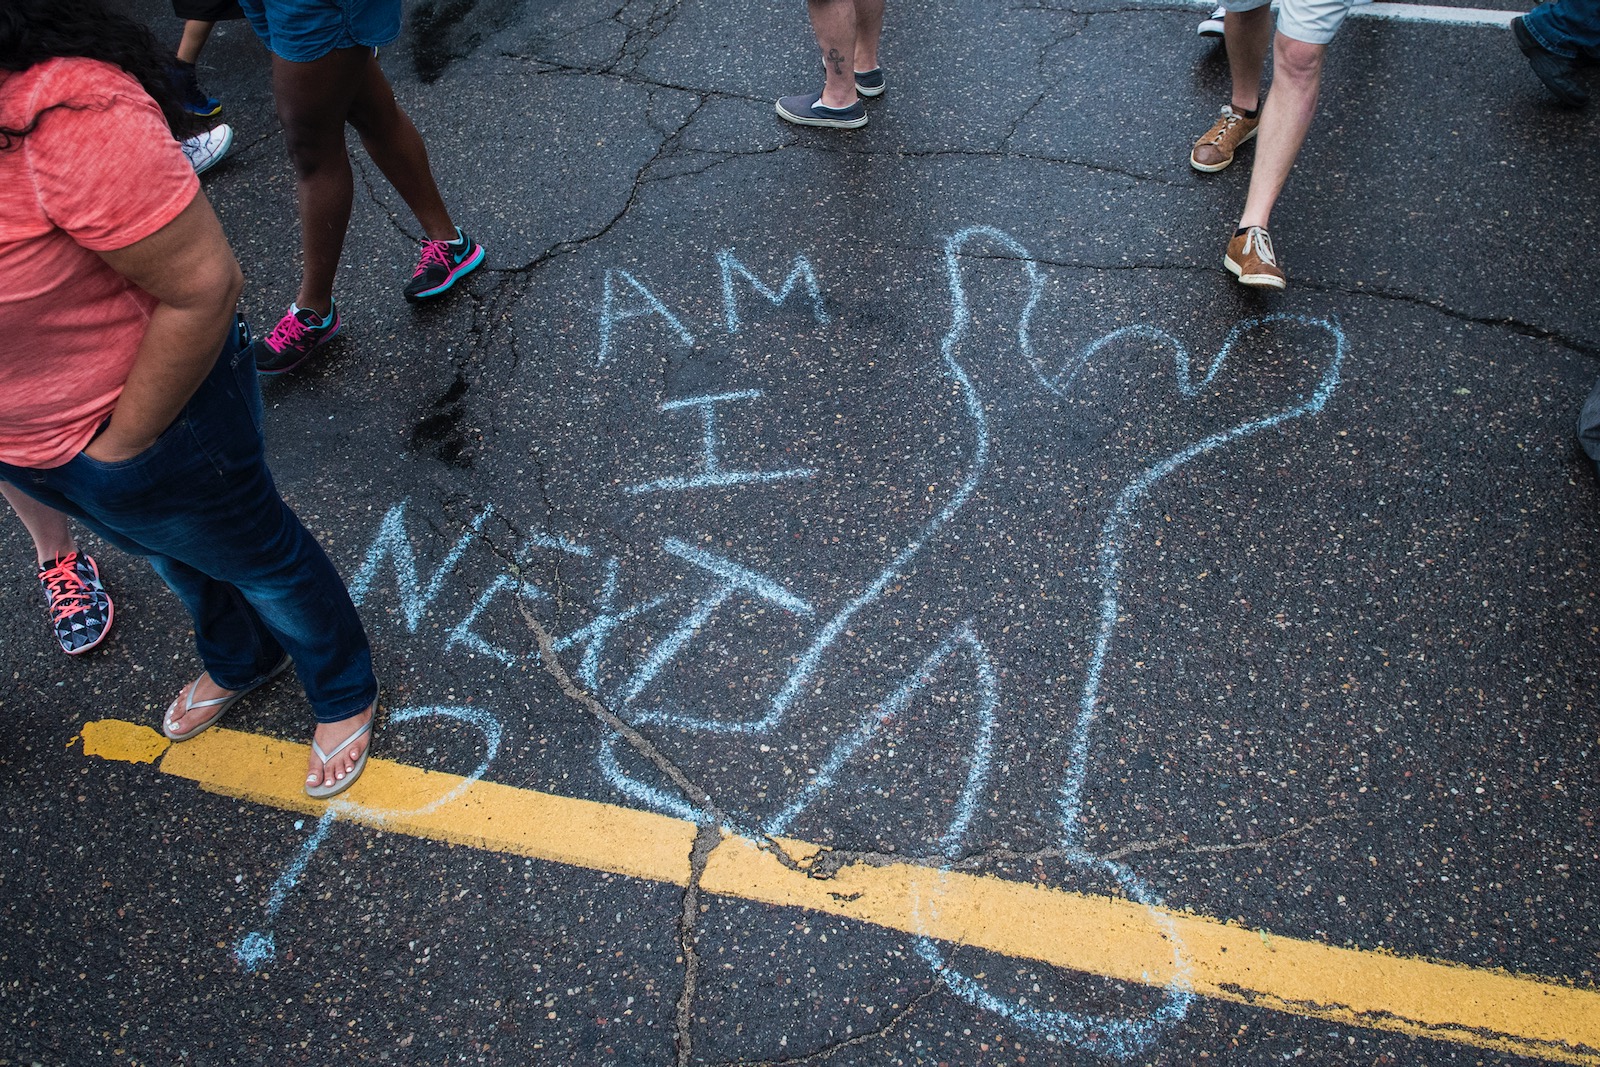 A message chalked on the road during a demonstration protesting the police shooting death of Philando Castile after a traffic stop, St. Paul, Minnesota, July 7, 2016